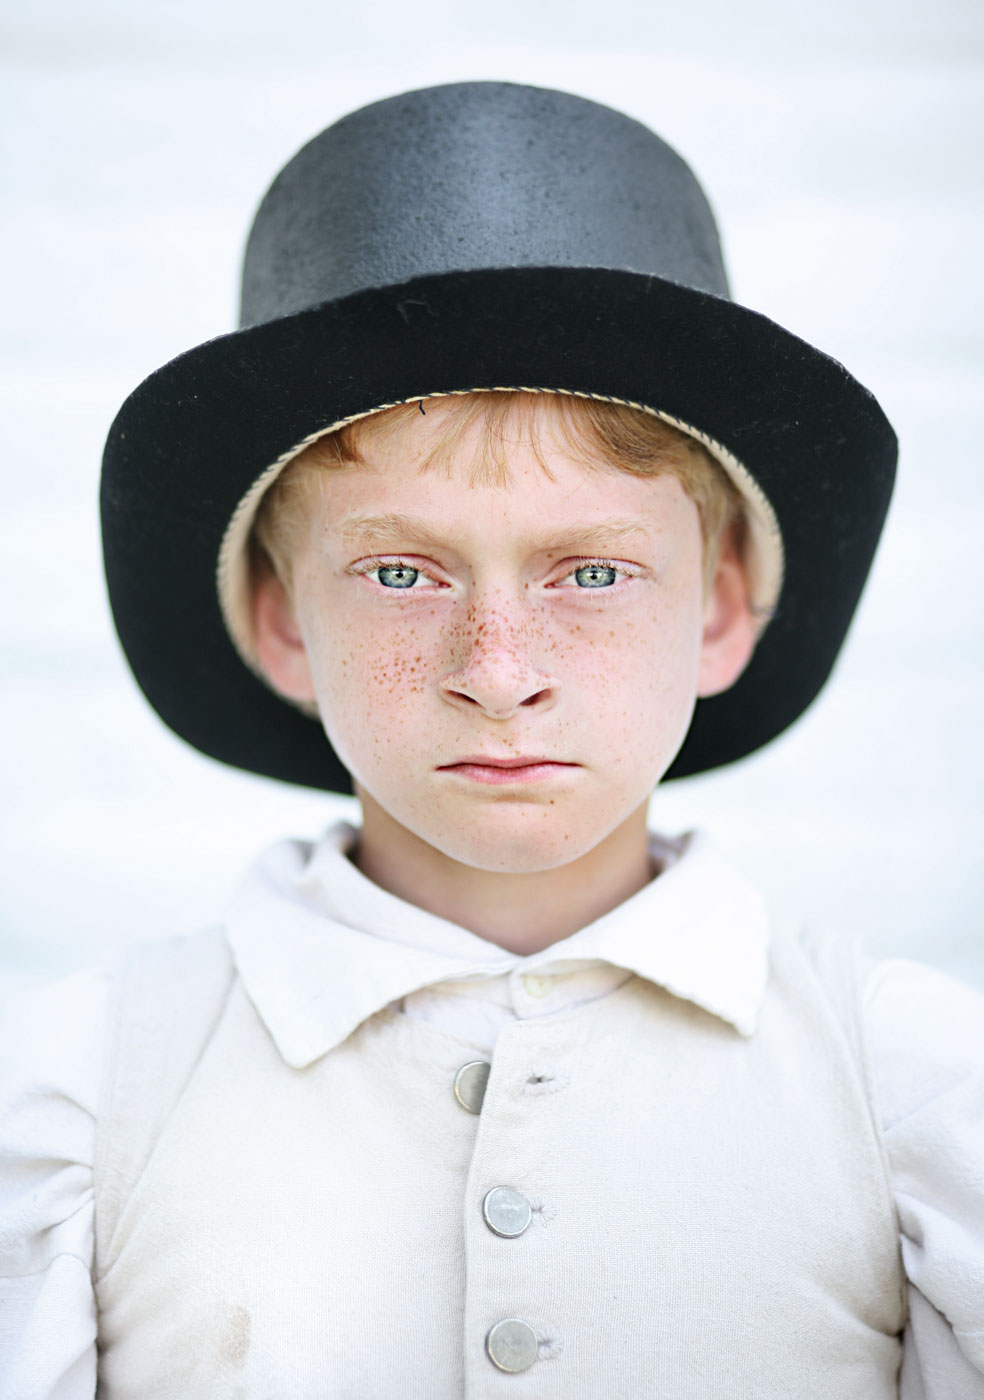 Jeremiah Friar, 9, poses for a portrait in period clothing at Fort Norfolk on Saturday, June 10, 2010. He and others were part of a living history presentation at the fort, and were representative of life during the early 1800's. He is from Smithfield, Virginia. 